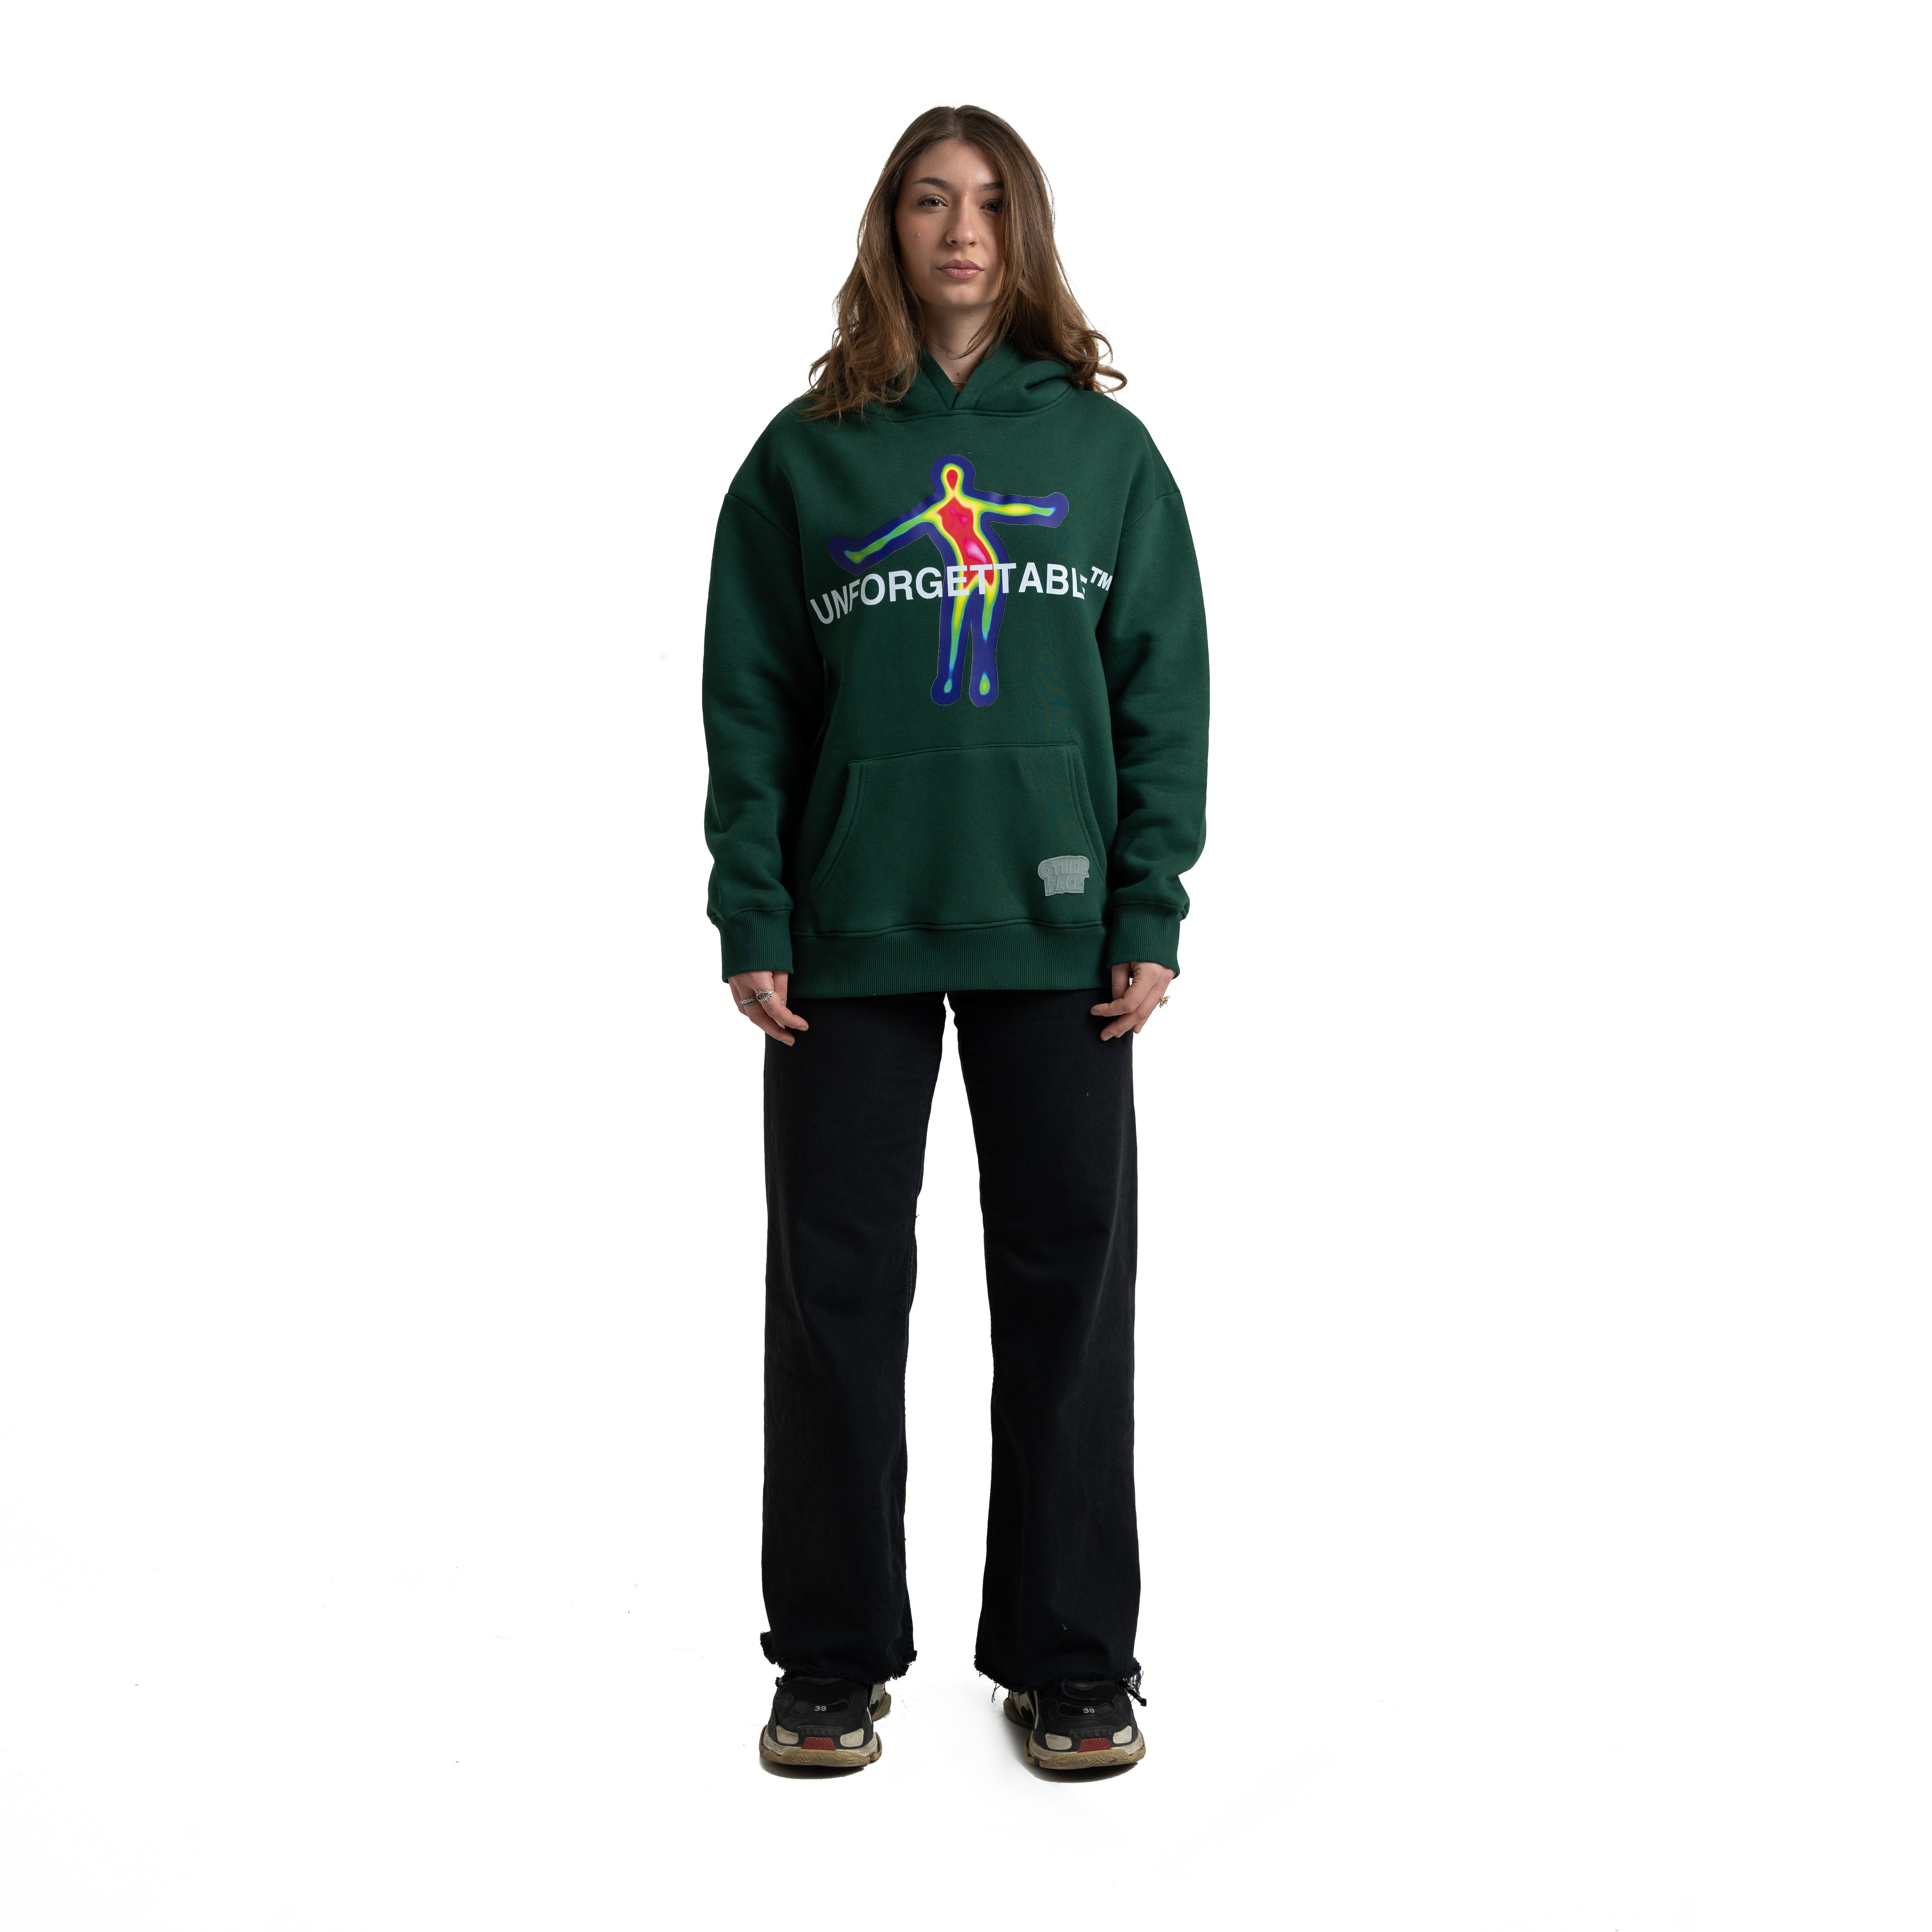 Other Face Unforgettable Green Hoodie